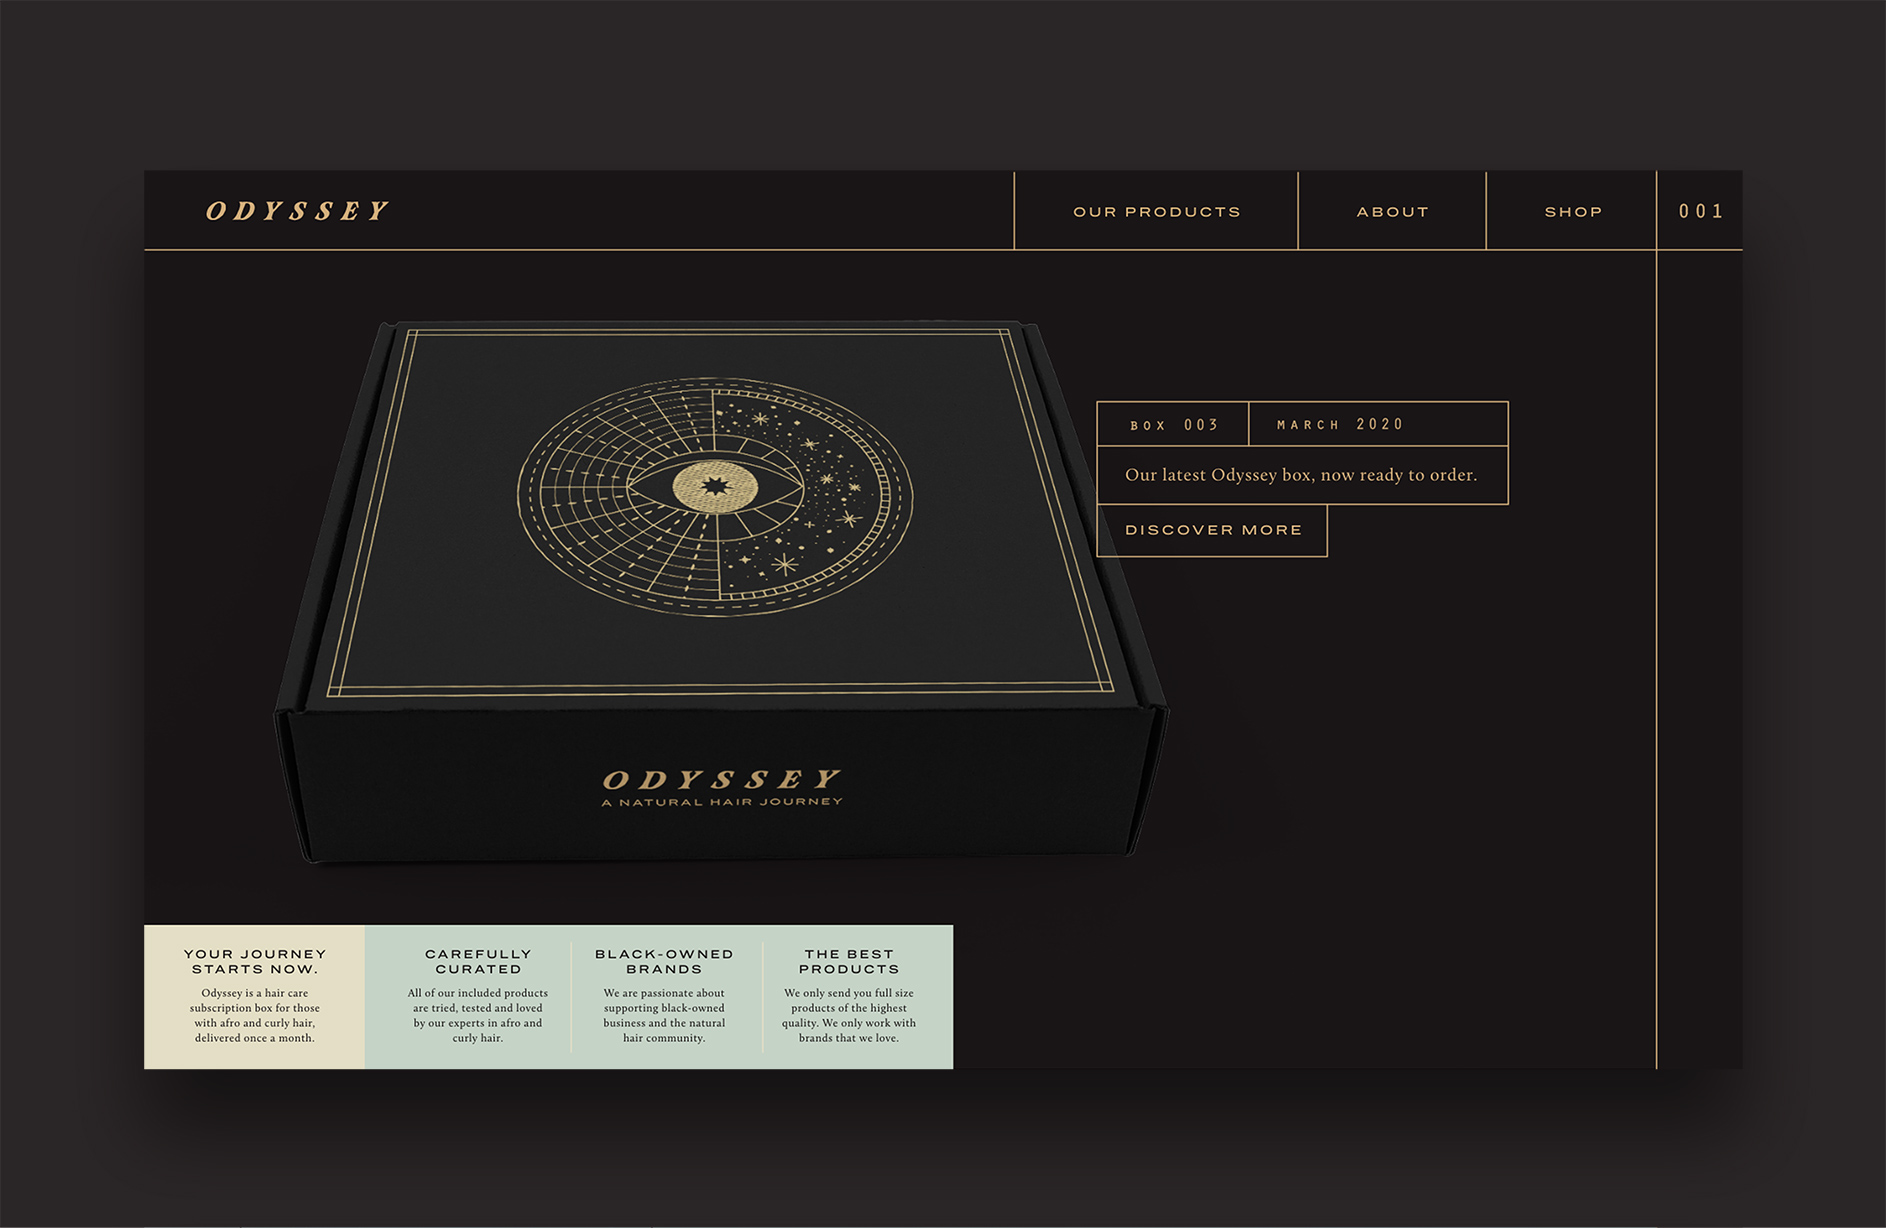 the odyssey website homepage featuring a closed box and information about the product